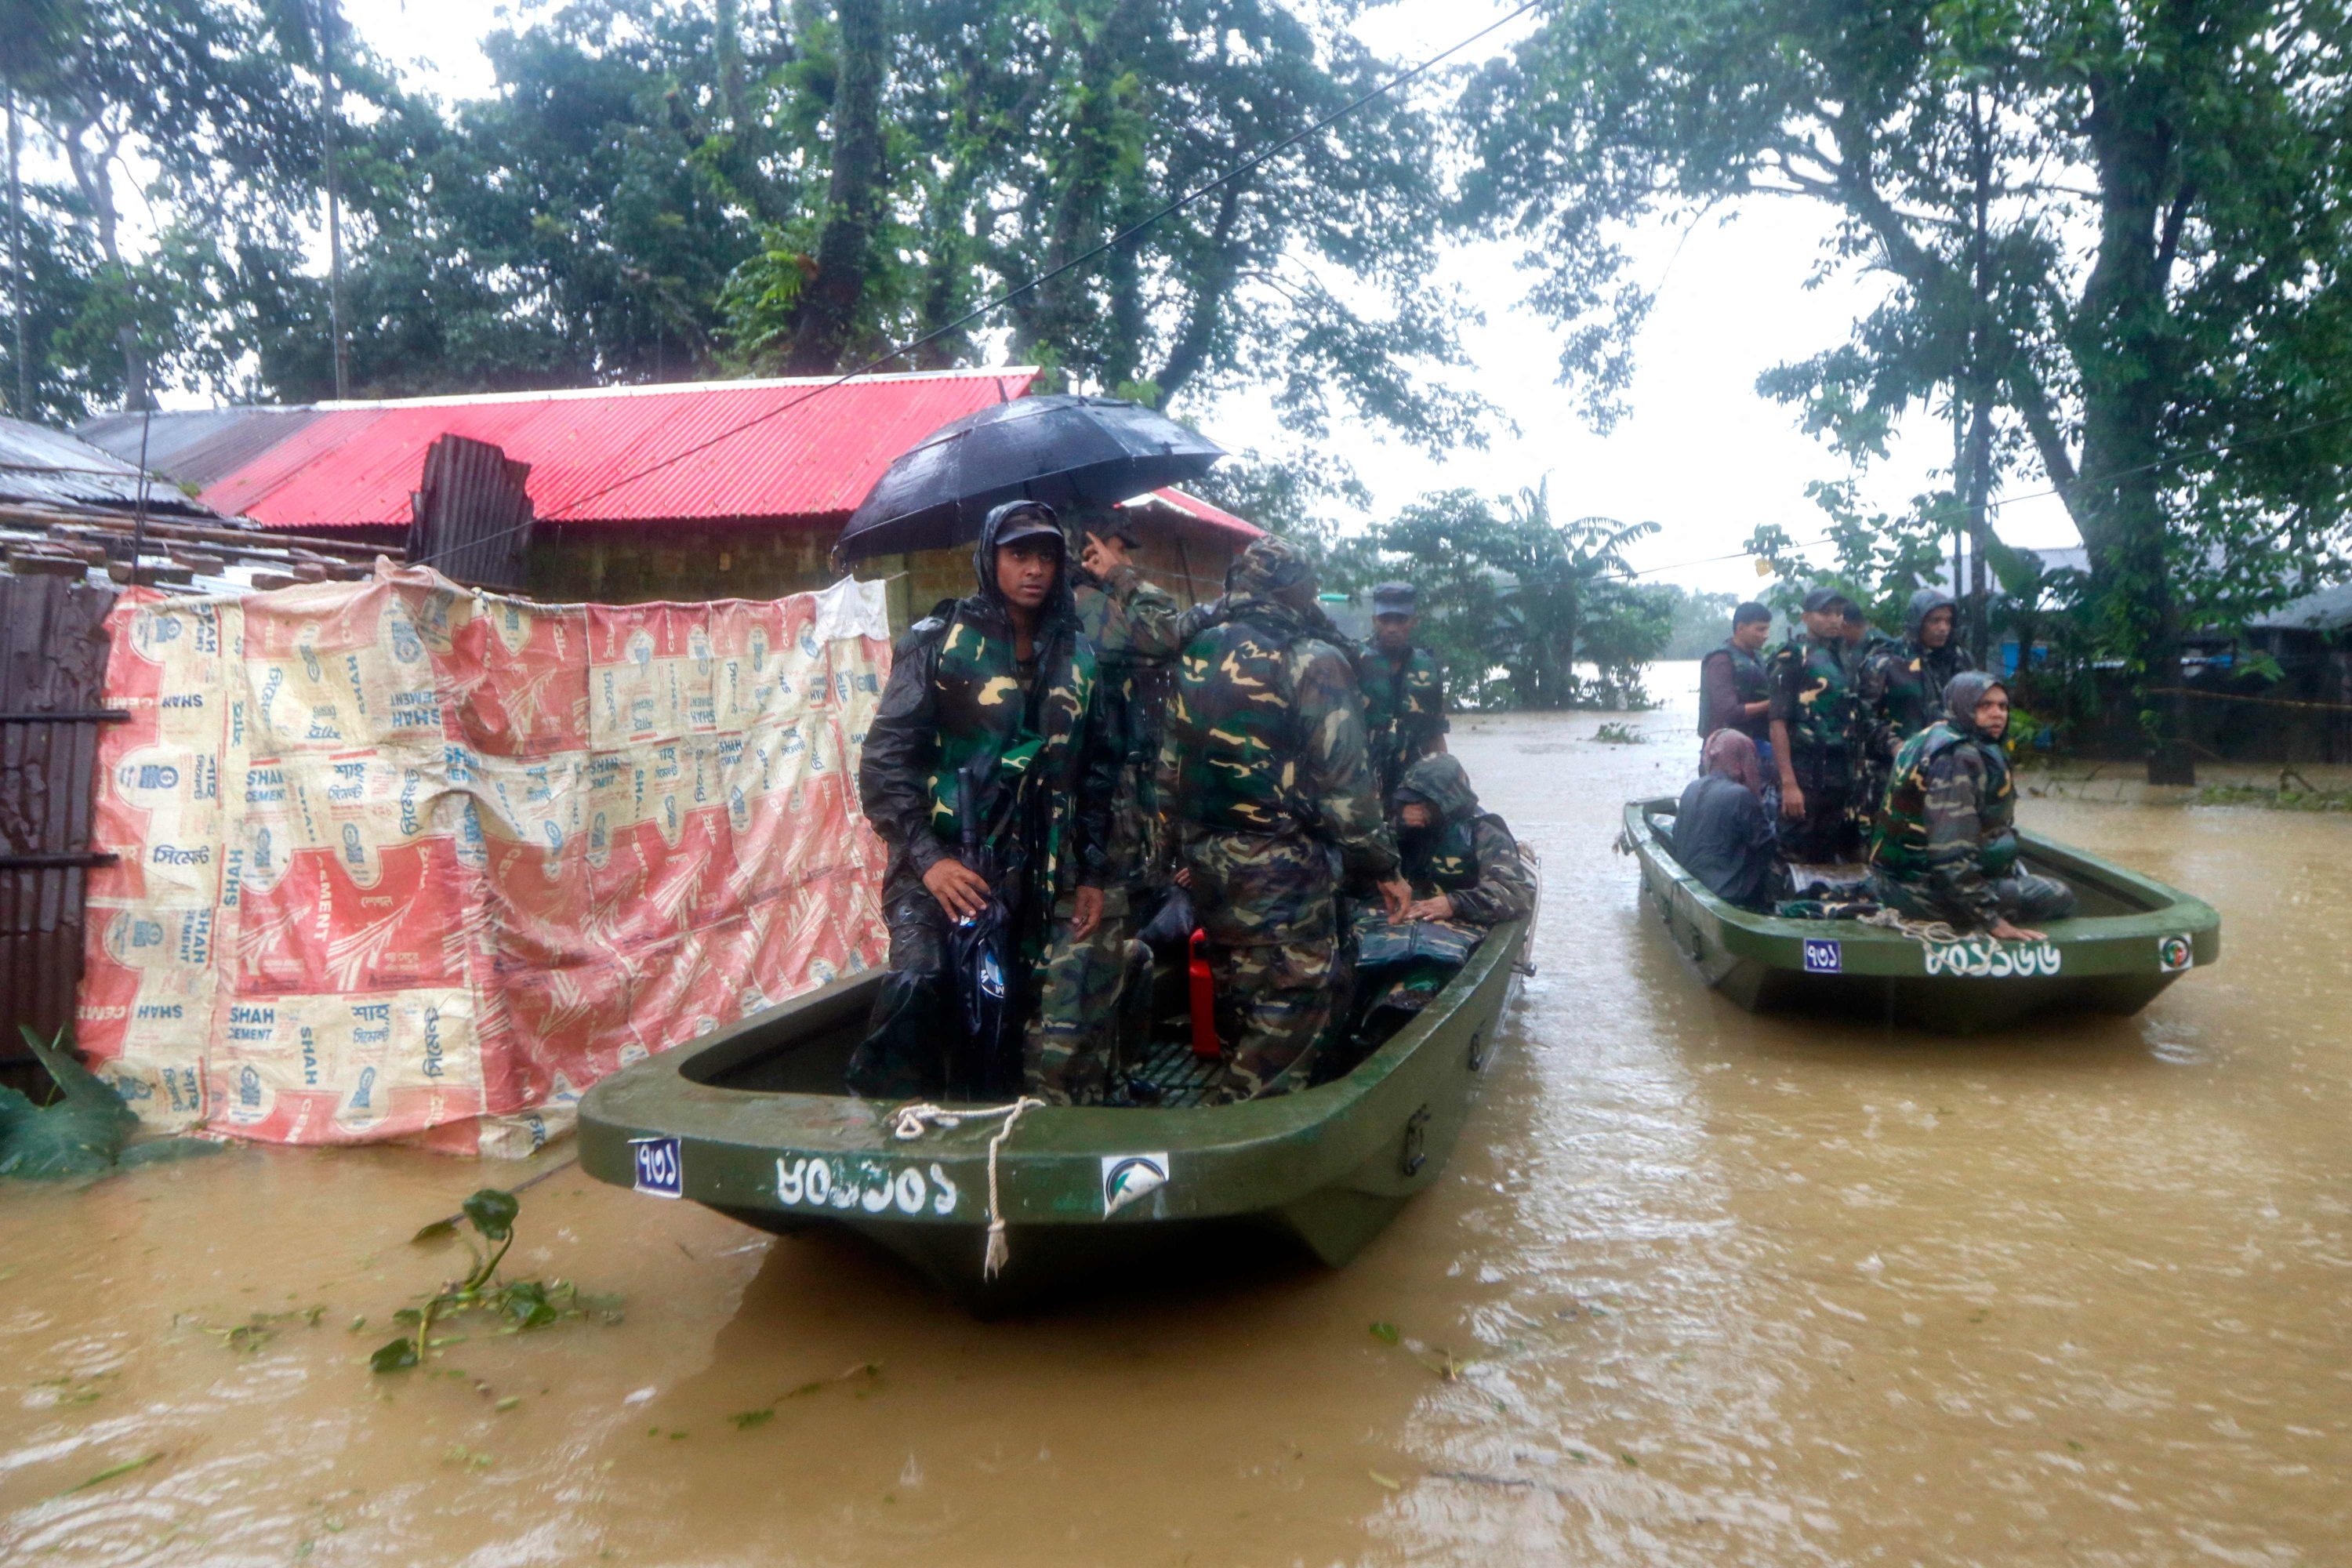 Bangladesh army personnel evacuate affected people from a flooded area following heavy monsoon rainfalls in Sylhet, Bangladesh, June 18, 2022. (AFP Photo)